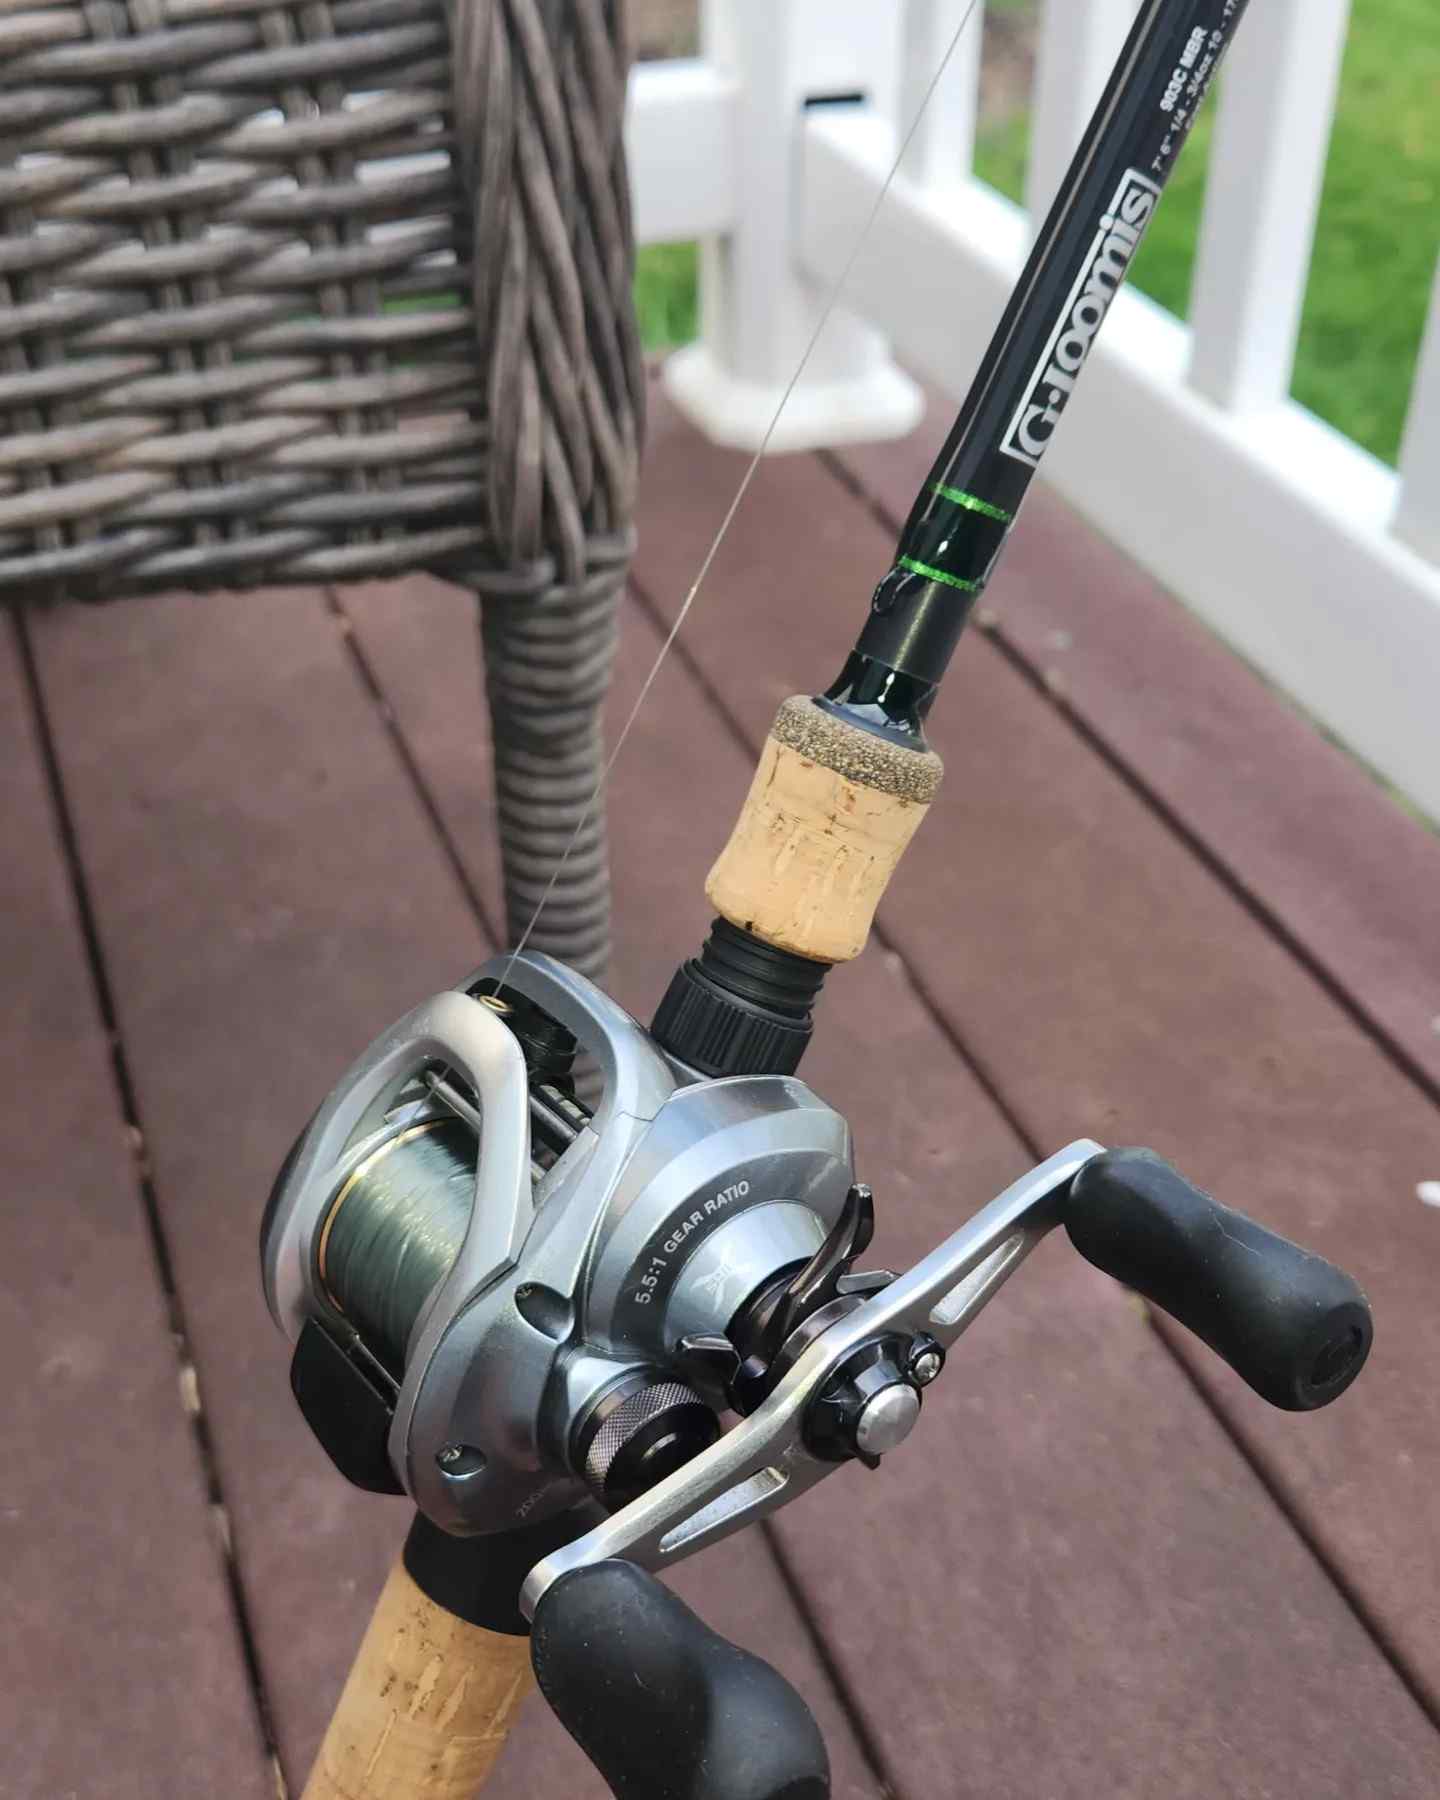 Best Knot CXX - Fishing Rods, Reels, Line, and Knots - Bass Fishing Forums